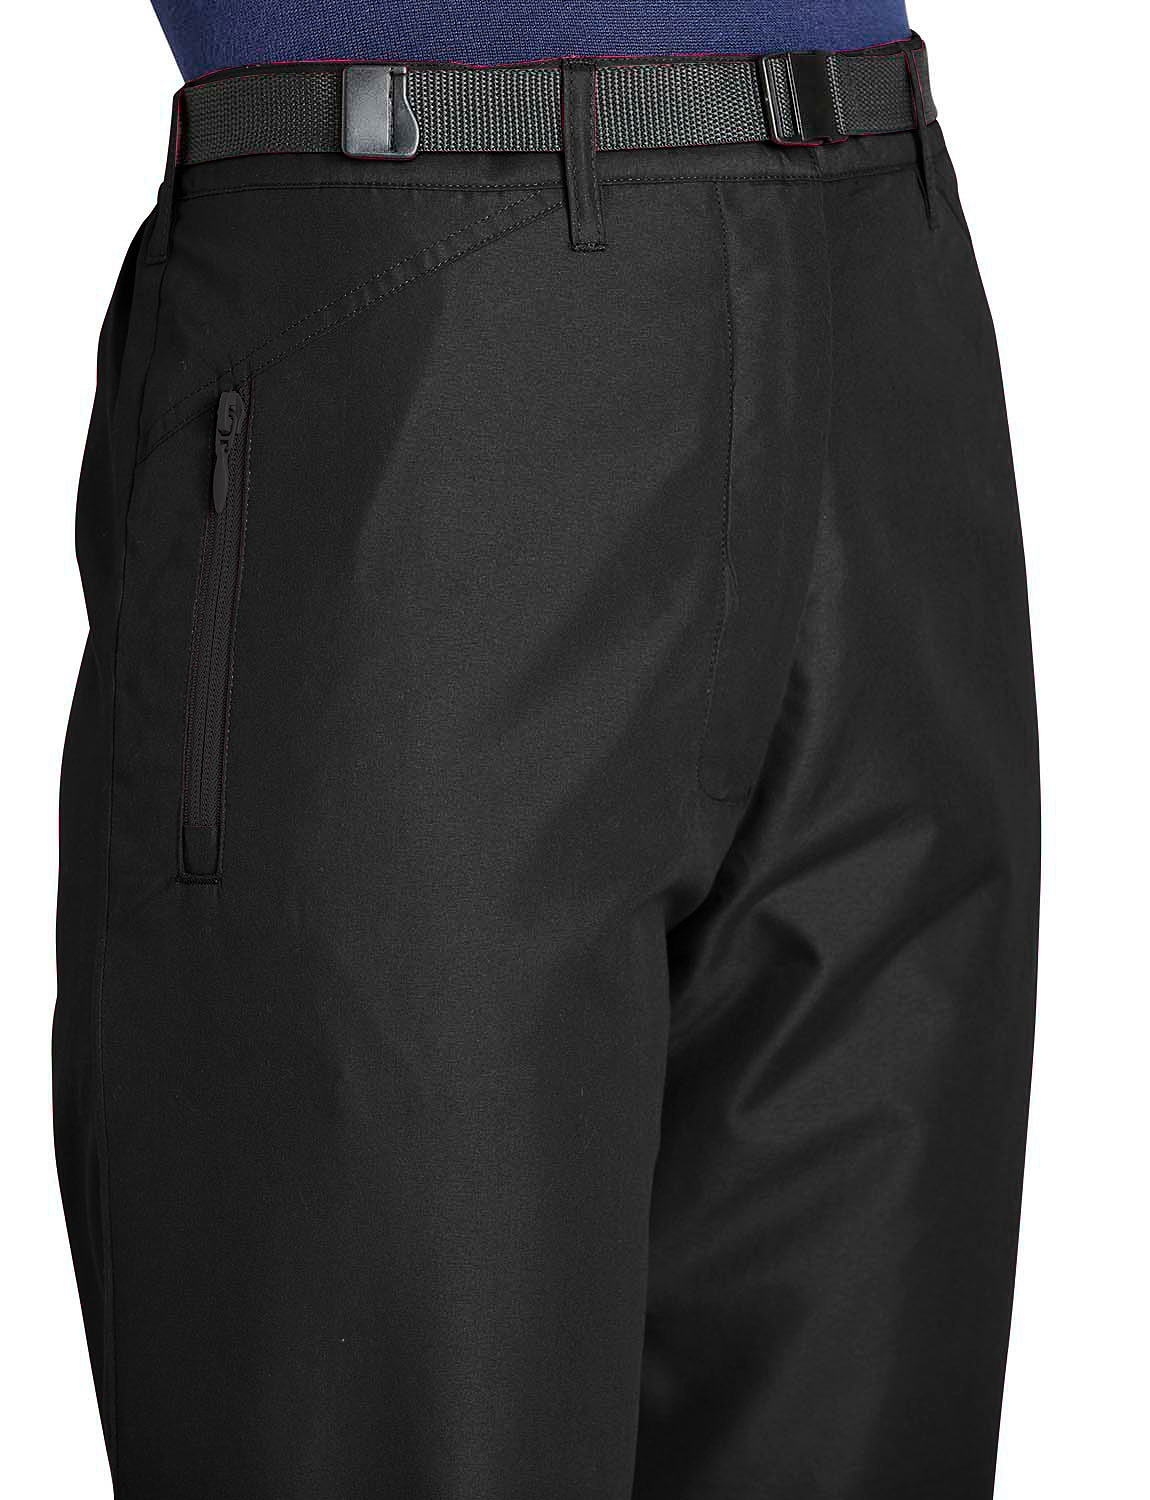 Thermal Lined Water Resistant Trouser With Belt | Chums